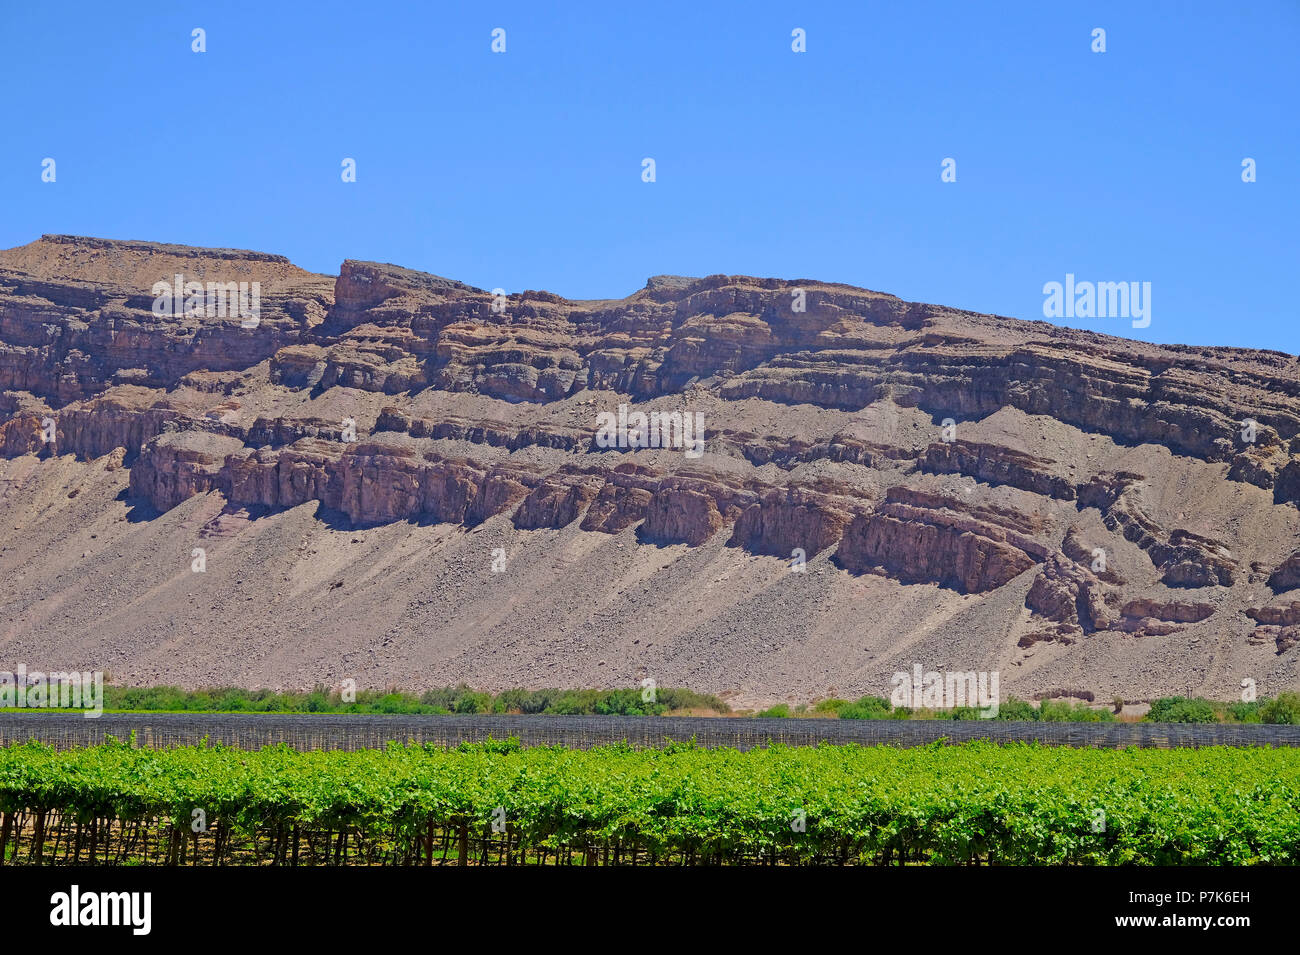 Wine growing at the Oranje close Noordoewer, highly eroded, picturesque mountains on the opposite side in South Africa, Namibia, border town Noordoewer Stock Photo